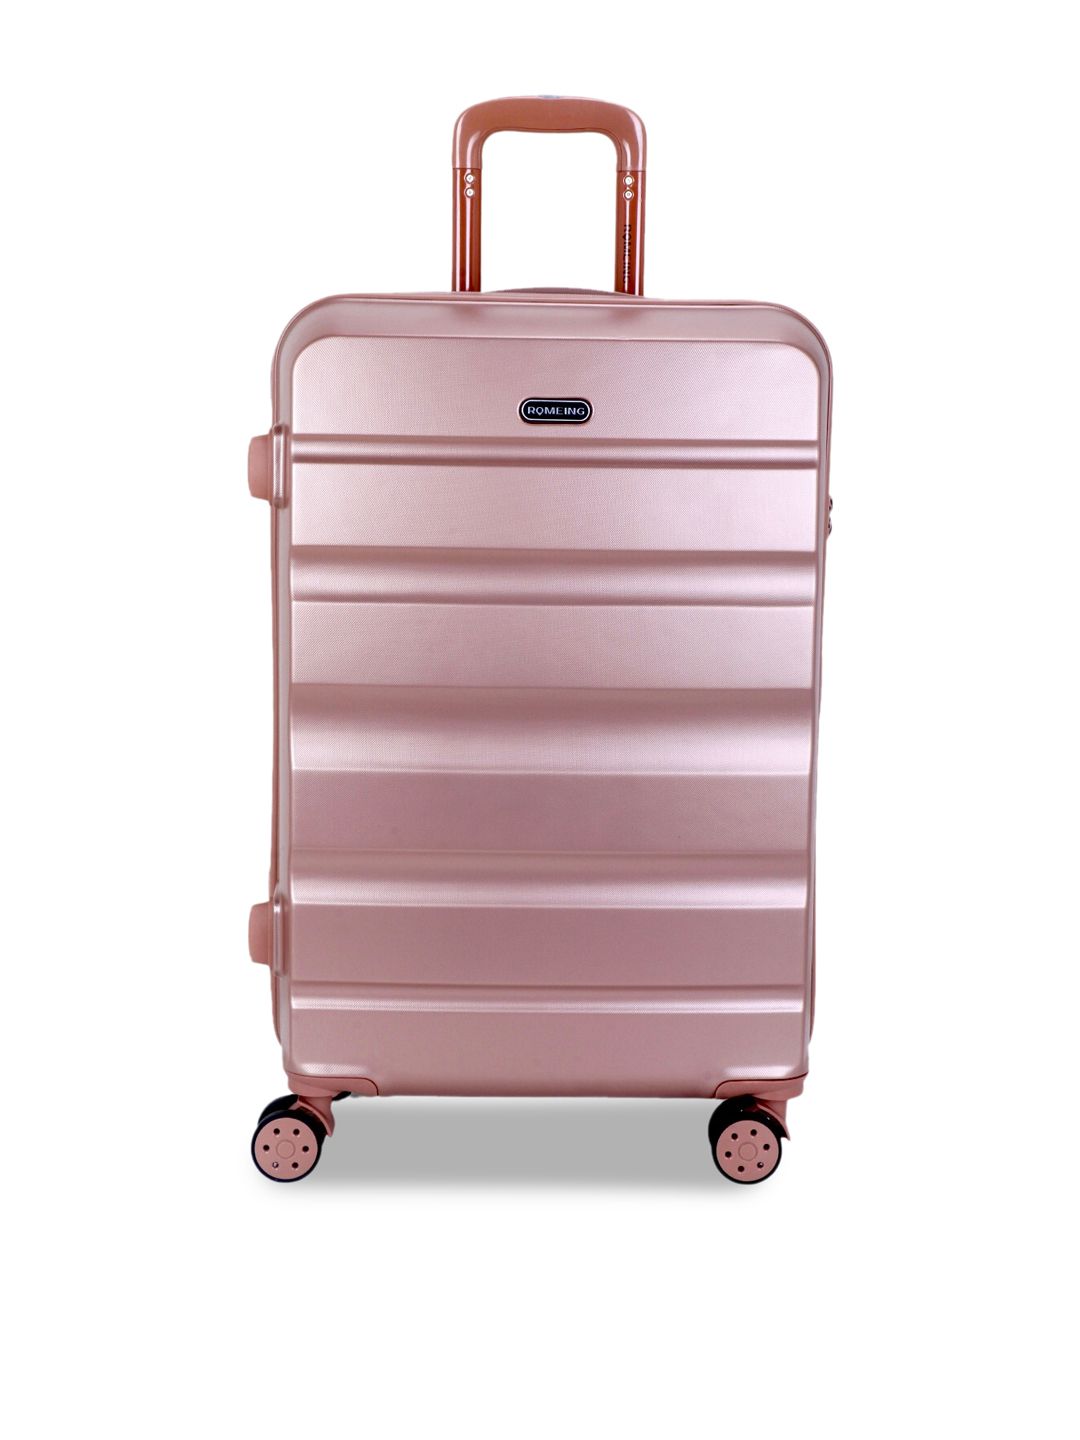 ROMEING Venice Rose Gold-Colored Textured Polycarbonate Medium Trolley Bag Price in India